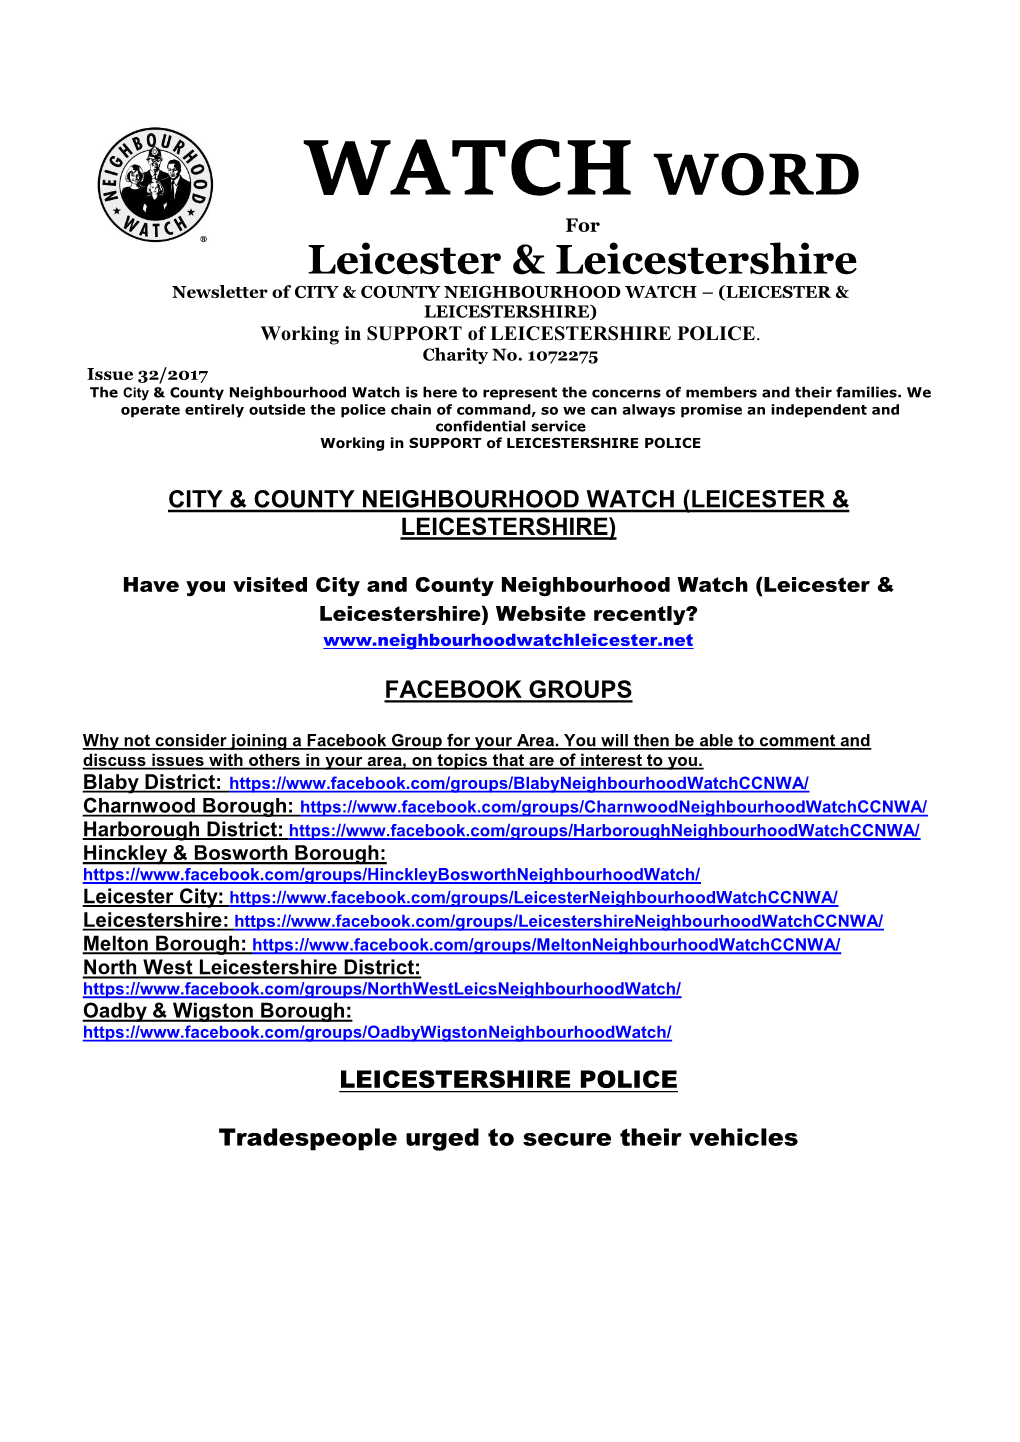 Leicester & Leicestershire